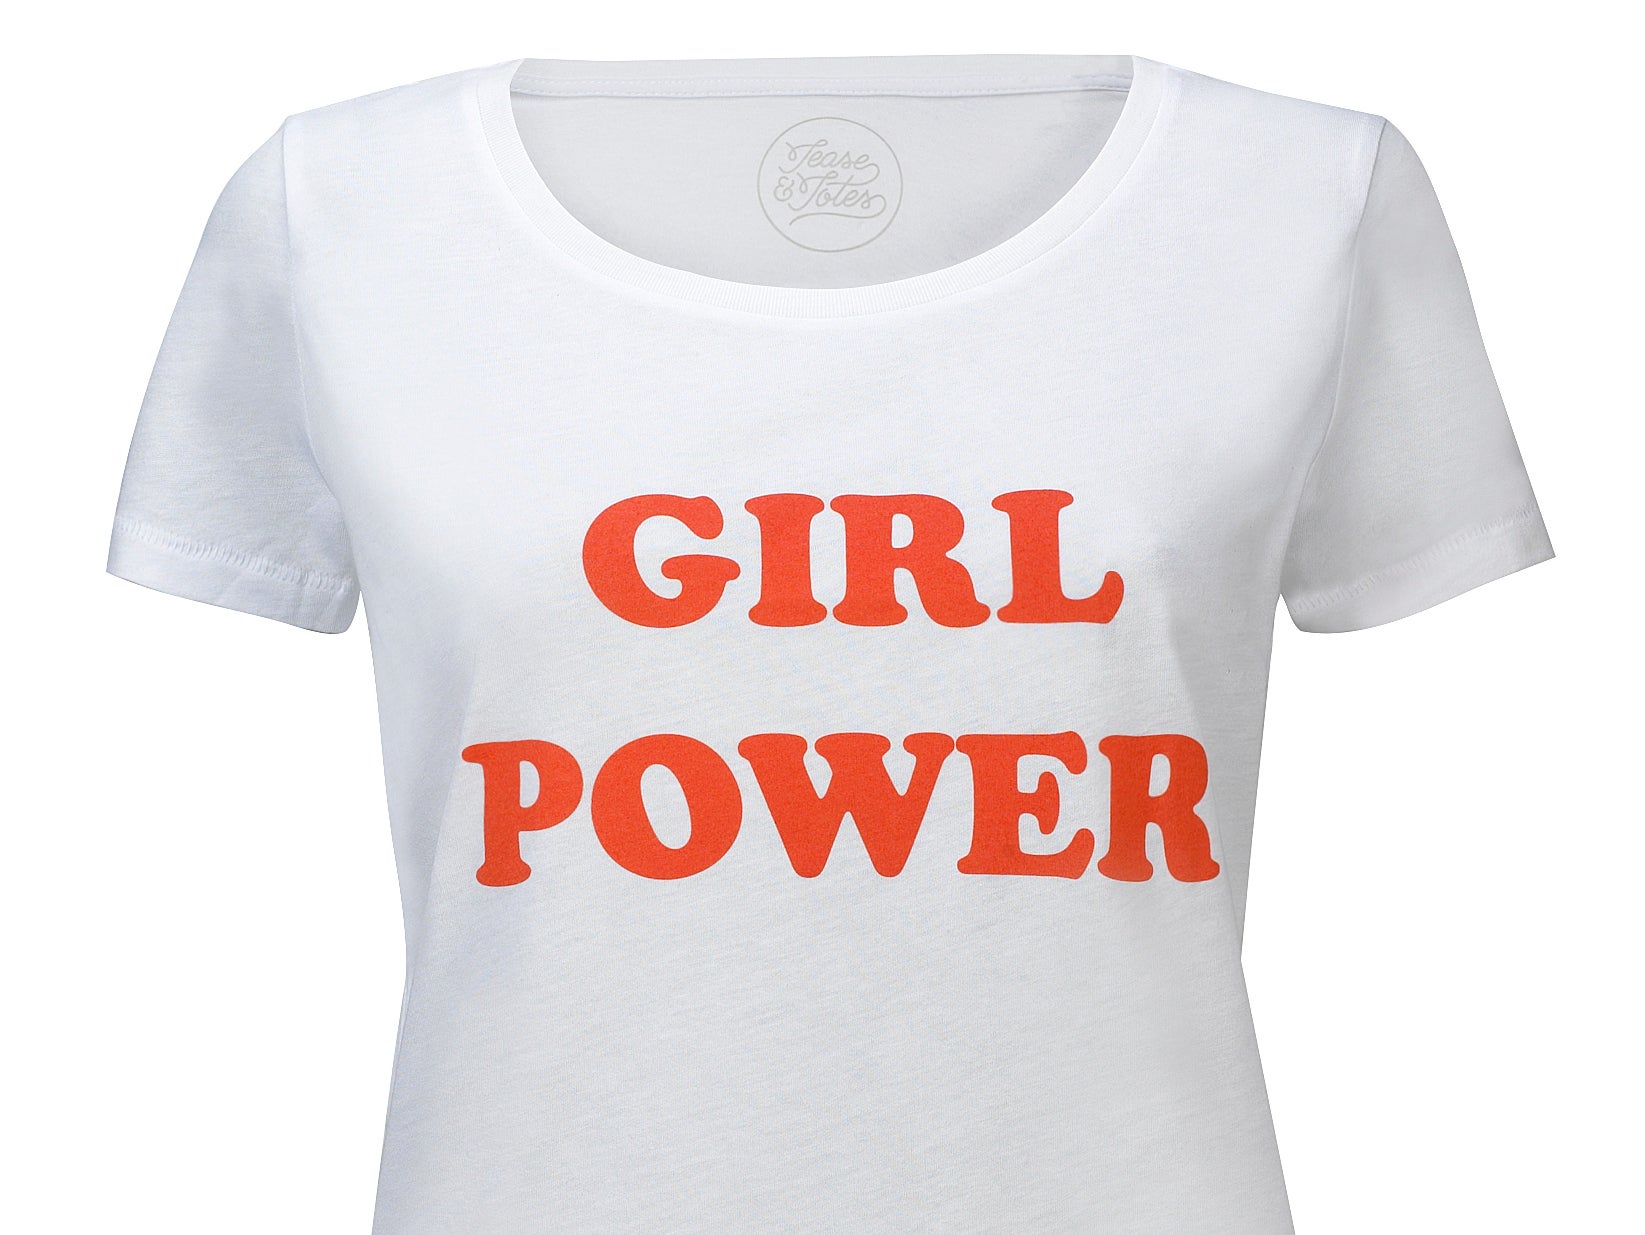 The 'Girl Power' T-shirt has been removed from sale on the F= website